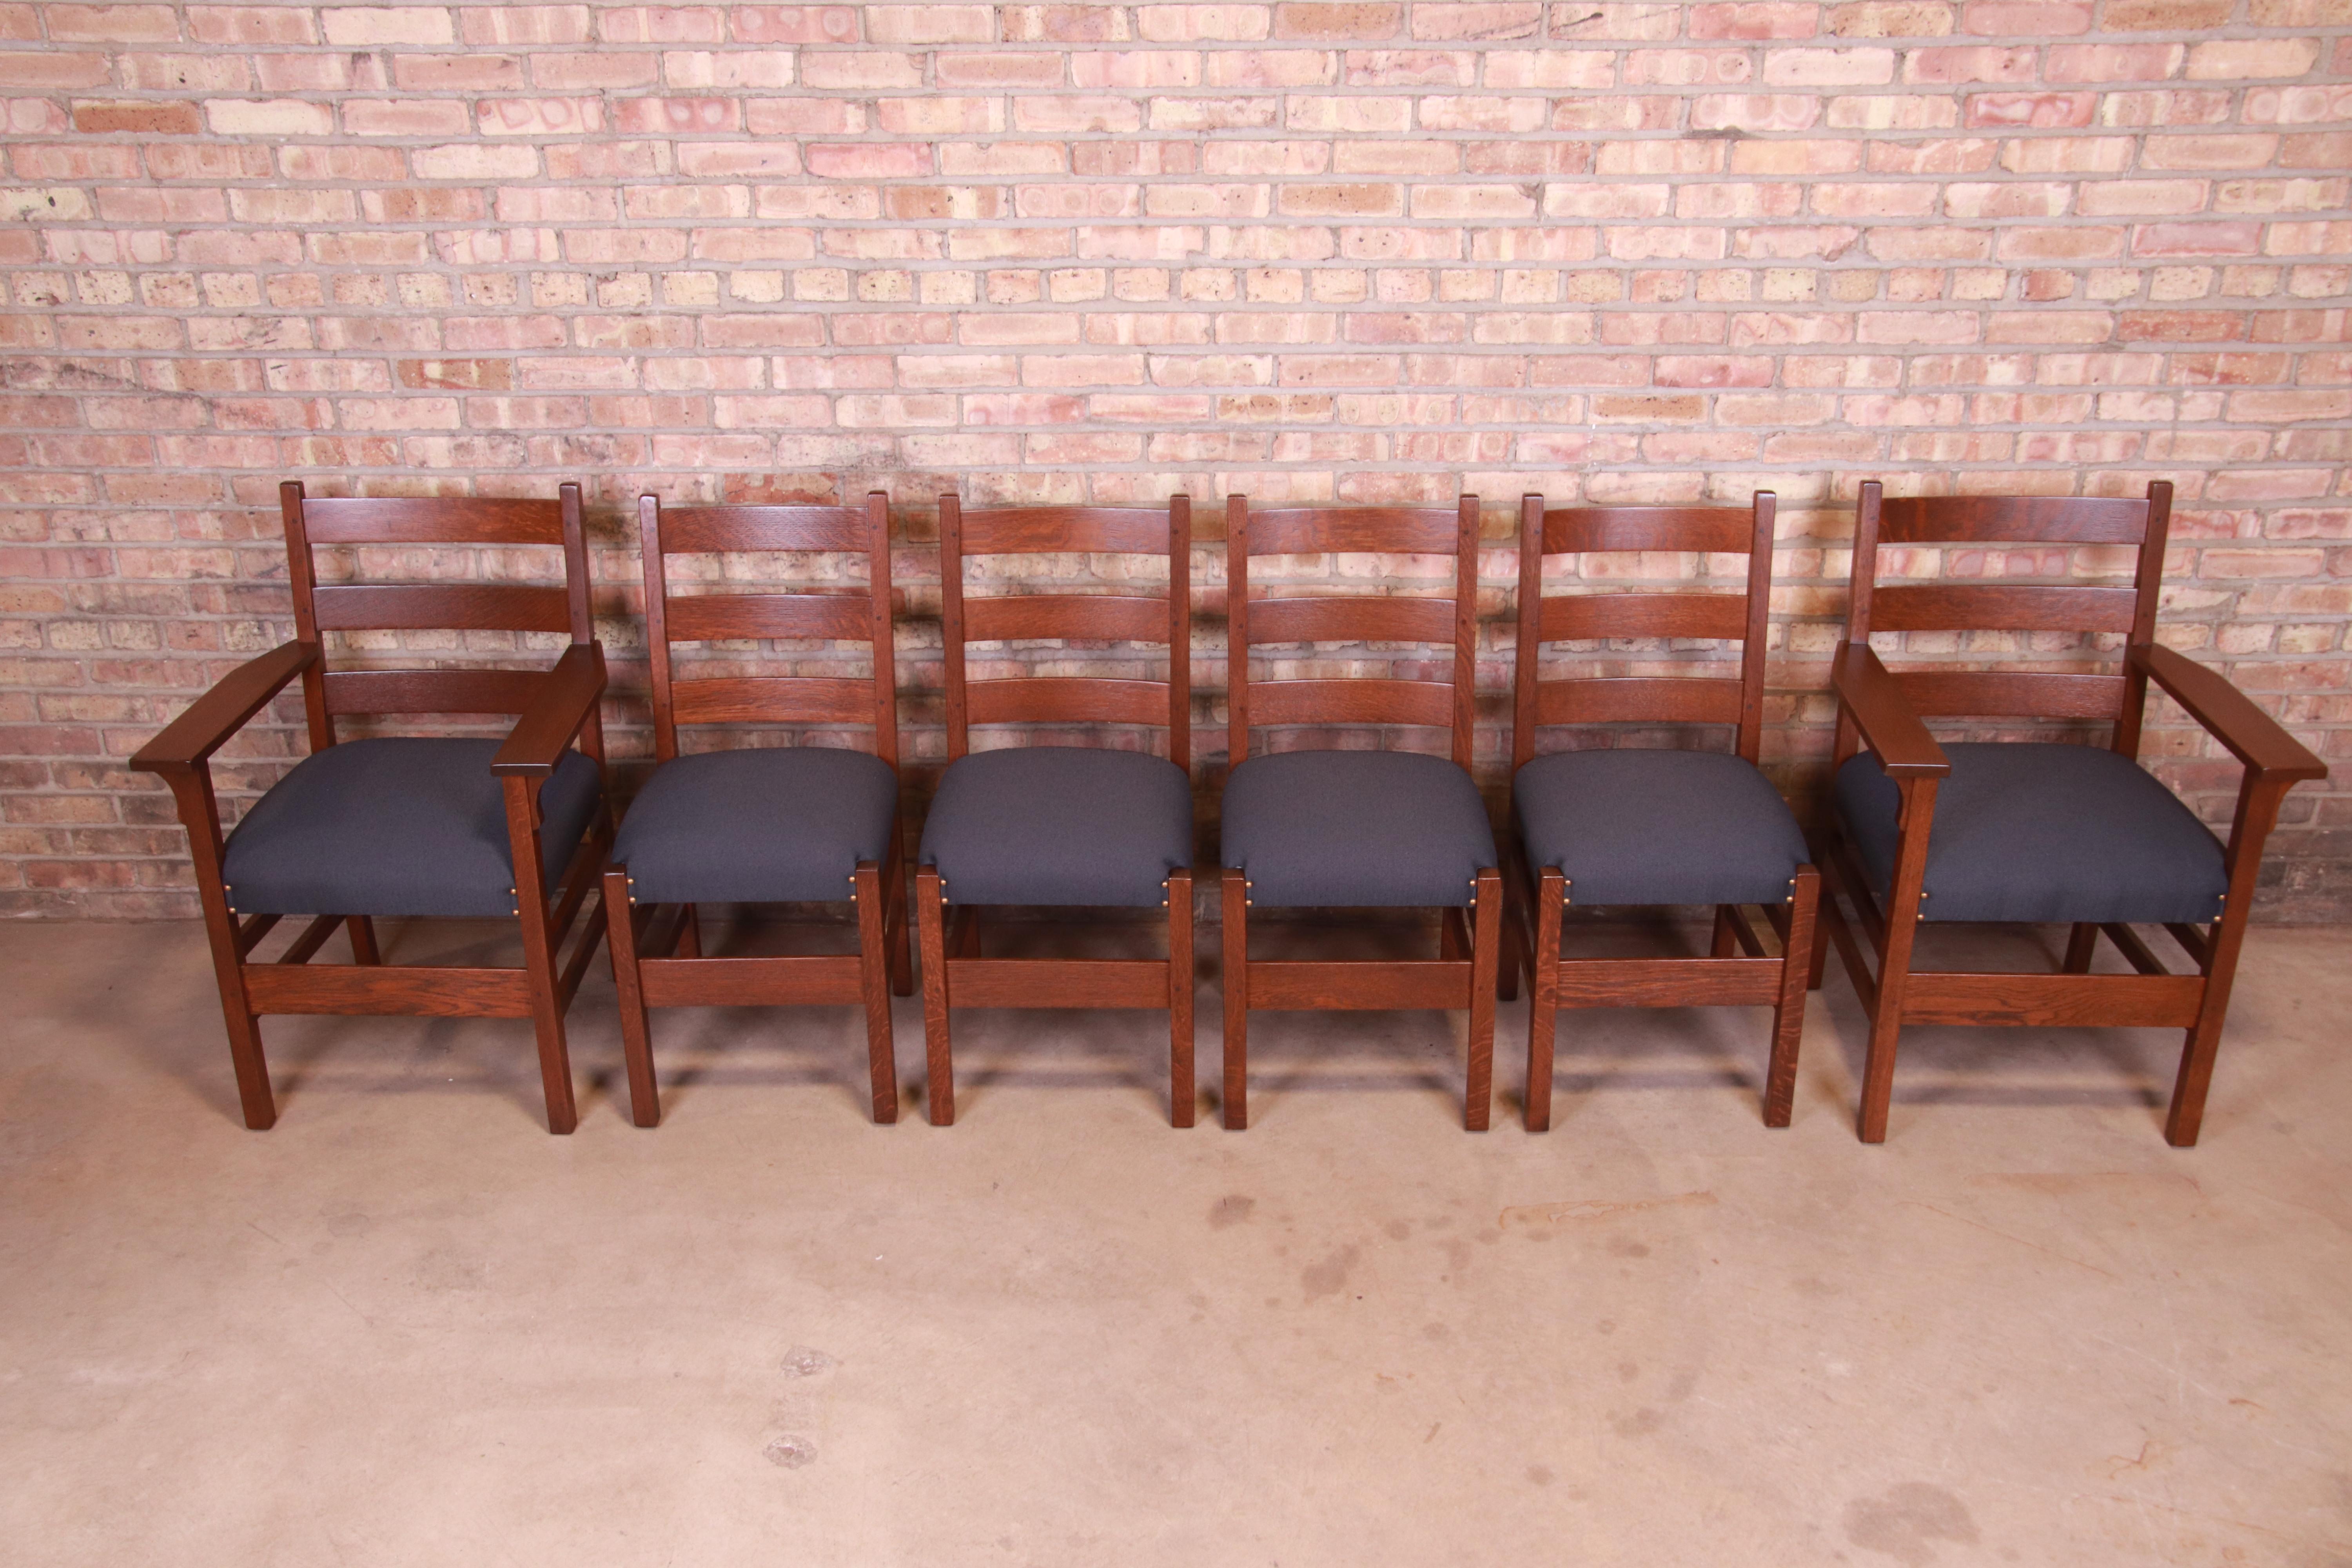 Early 20th Century Rare Signed Gustav Stickley Mission Oak Arts & Crafts Dining Chairs, Restored